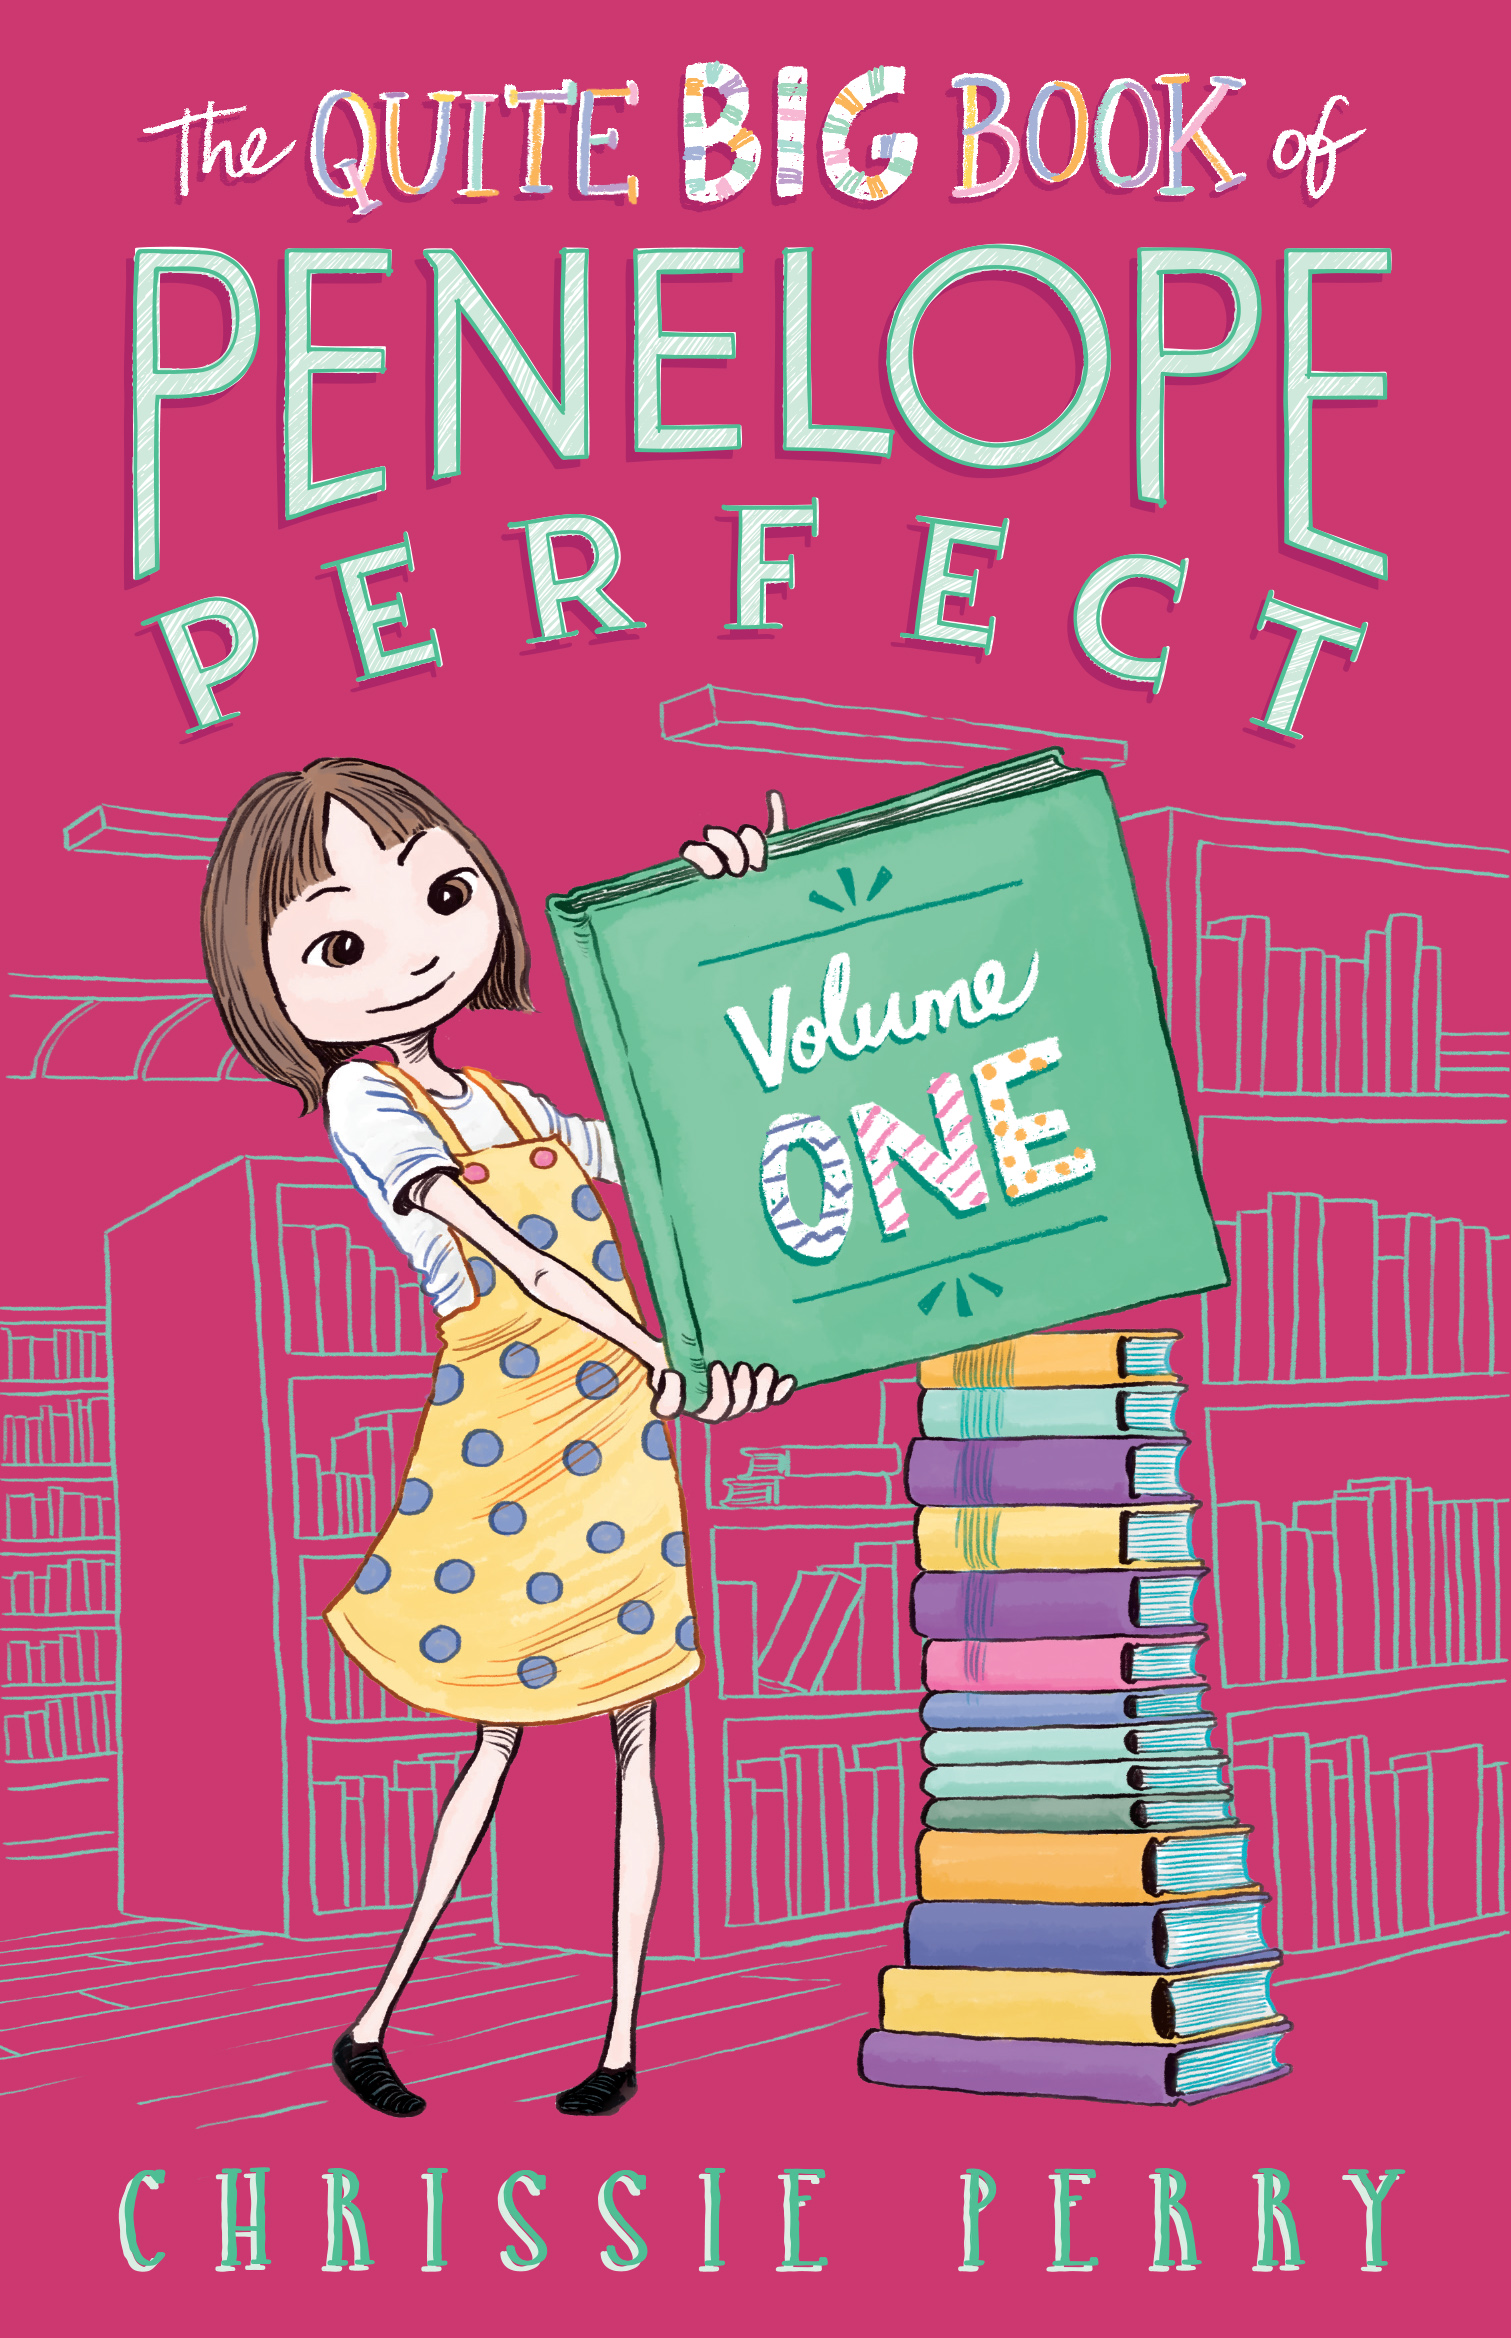 The Quite Big Book of Penelope Perfect: Volume 1